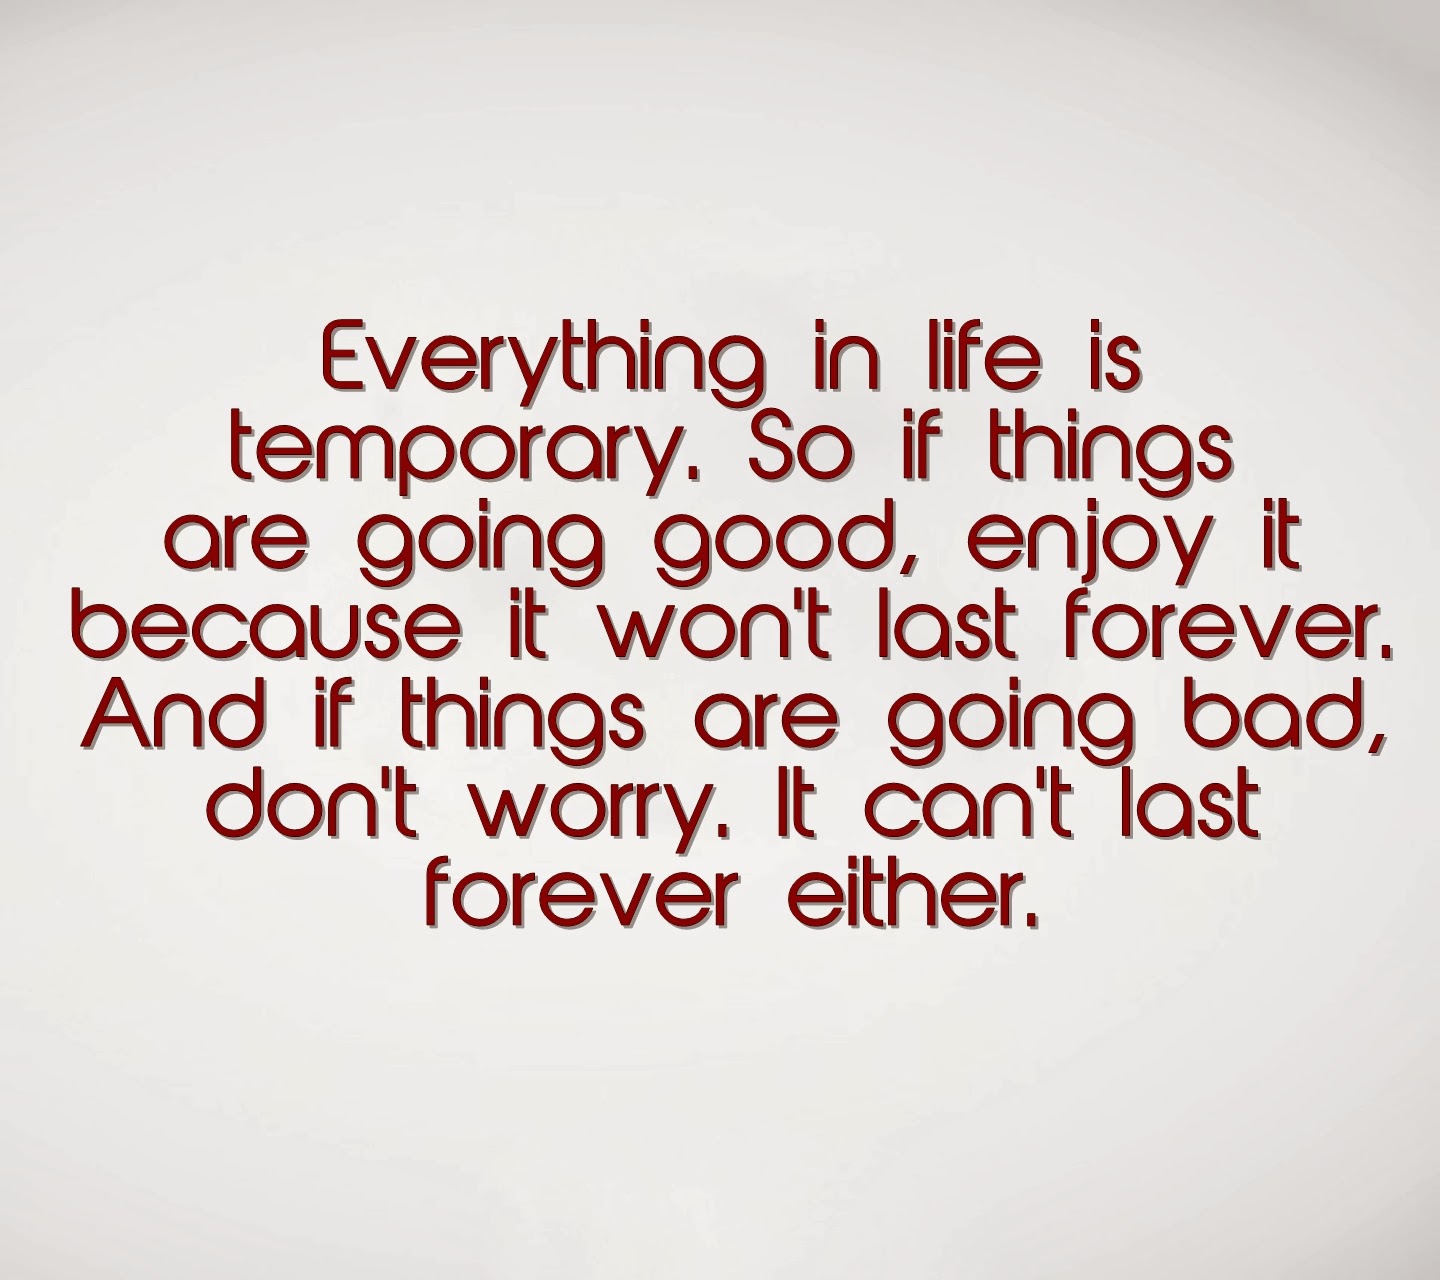 http://best-quotes-and-sayings.blogspot.com/2013/12/temporary.html